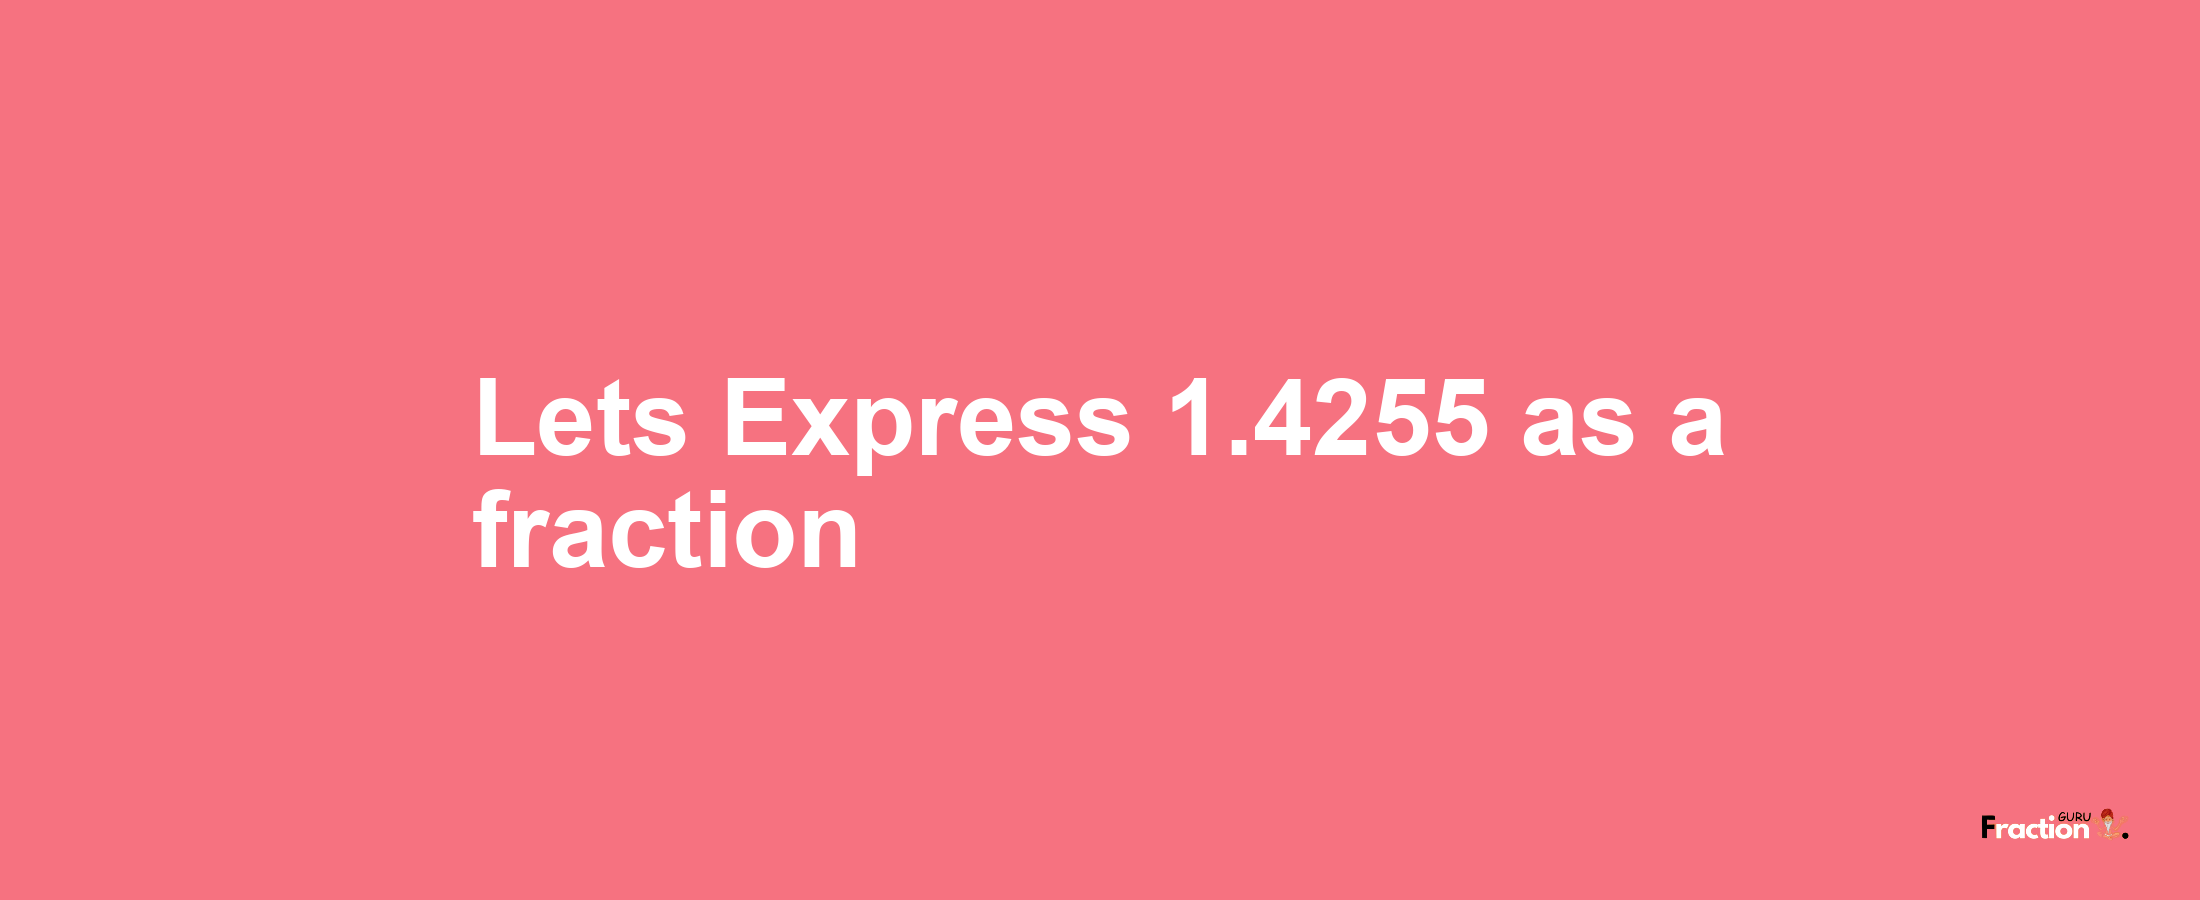 Lets Express 1.4255 as afraction